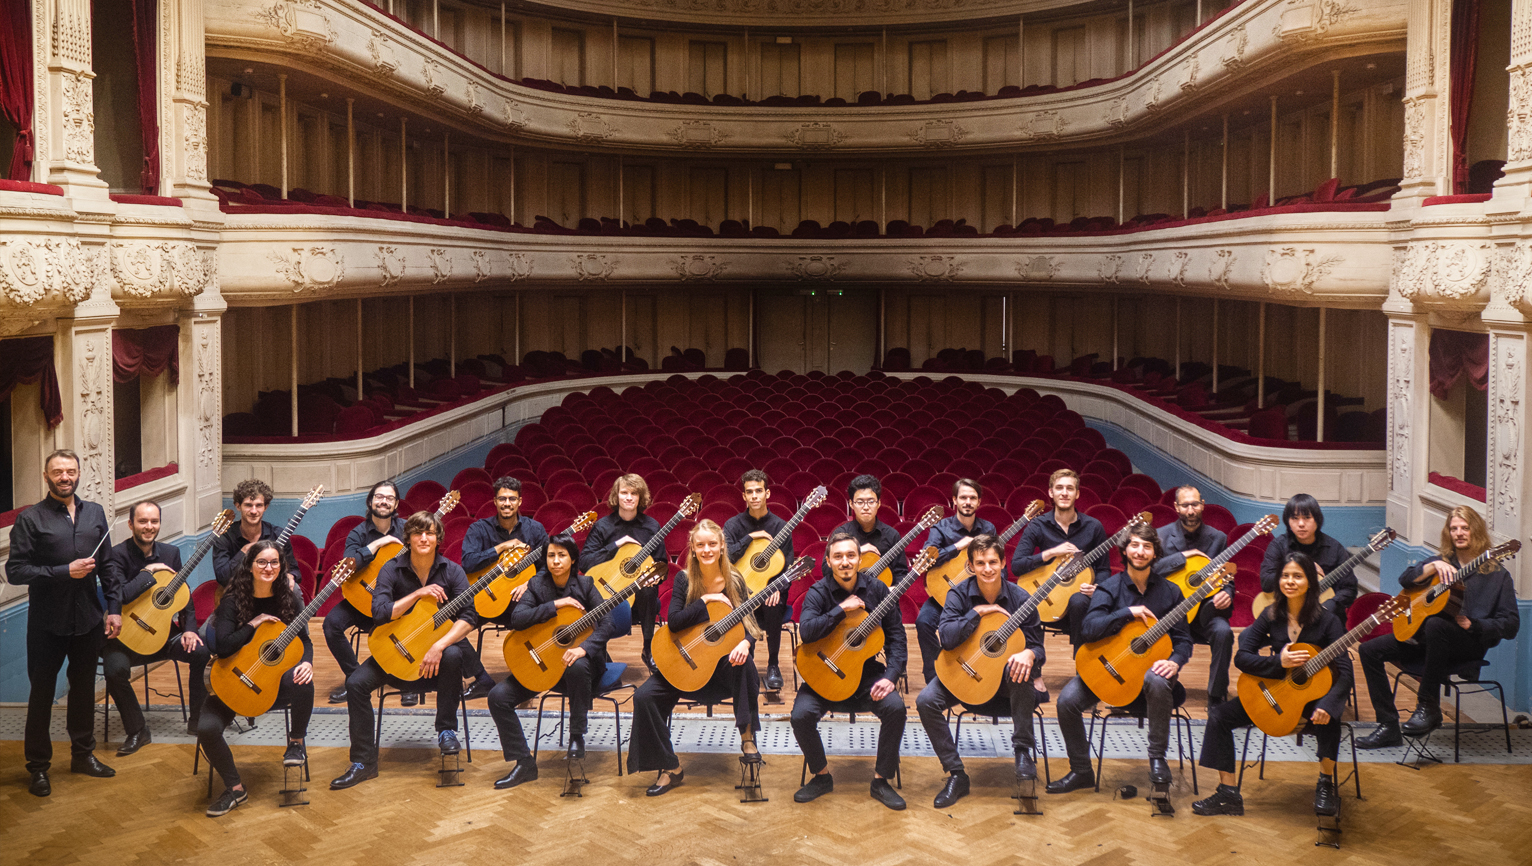 19 young virtuosos playing together - Brussels International Guitar Festival & Competitions